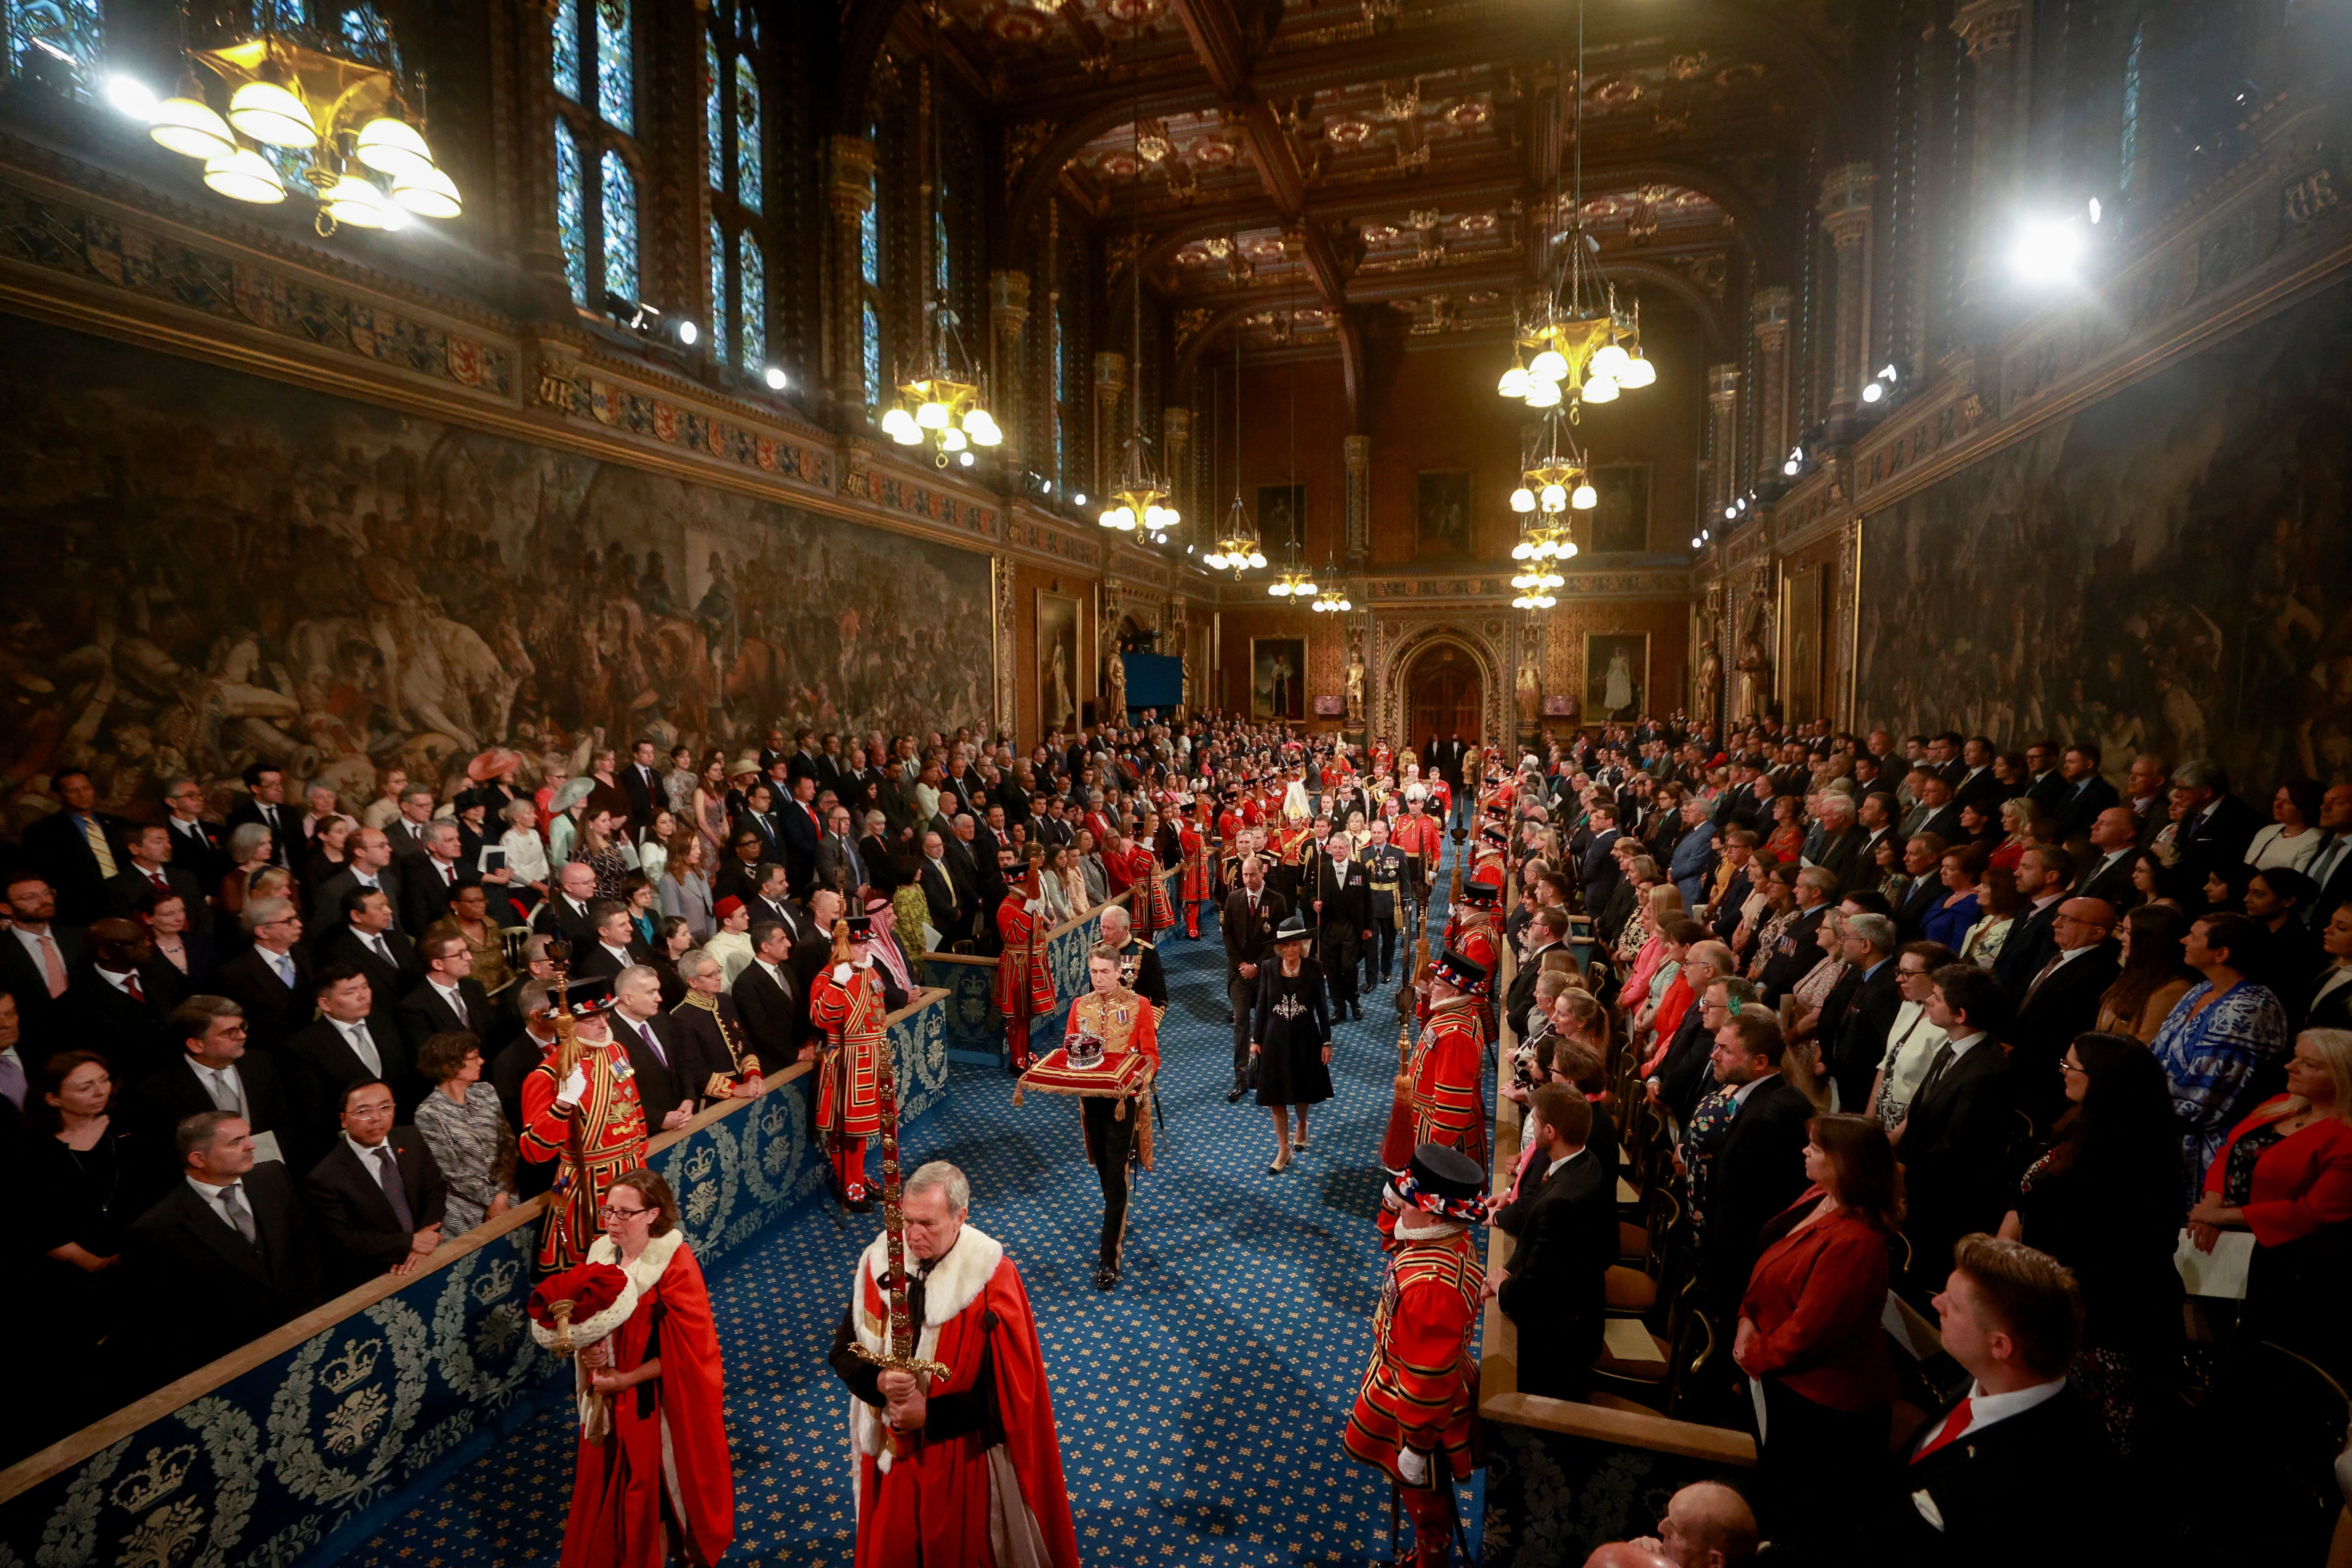 The Prince of Wales and the Duchess of Cornwall with the Duke of Cambridge proceed behind the Imperial State Crown through the Royal Gallery during the state opening of parliament in the House of Lords